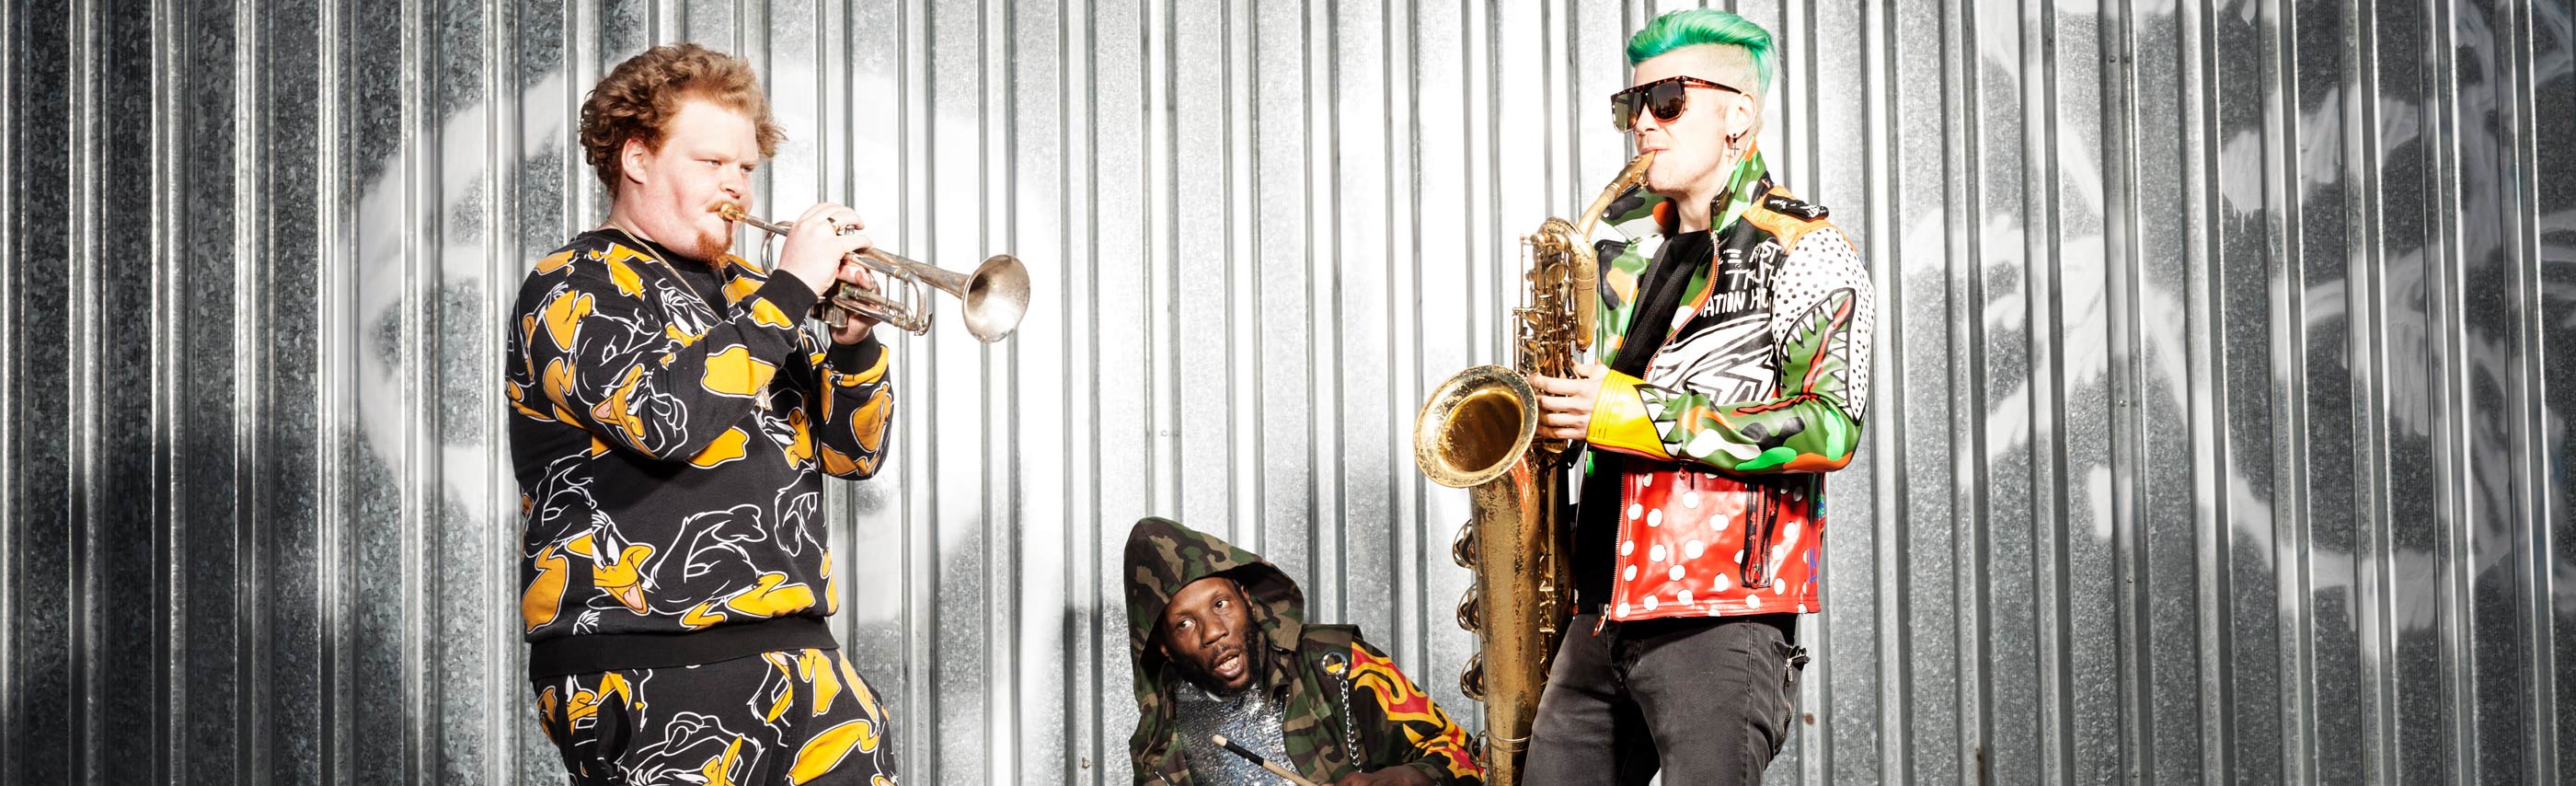 Too Many Zooz – Pug In A Tub Tour